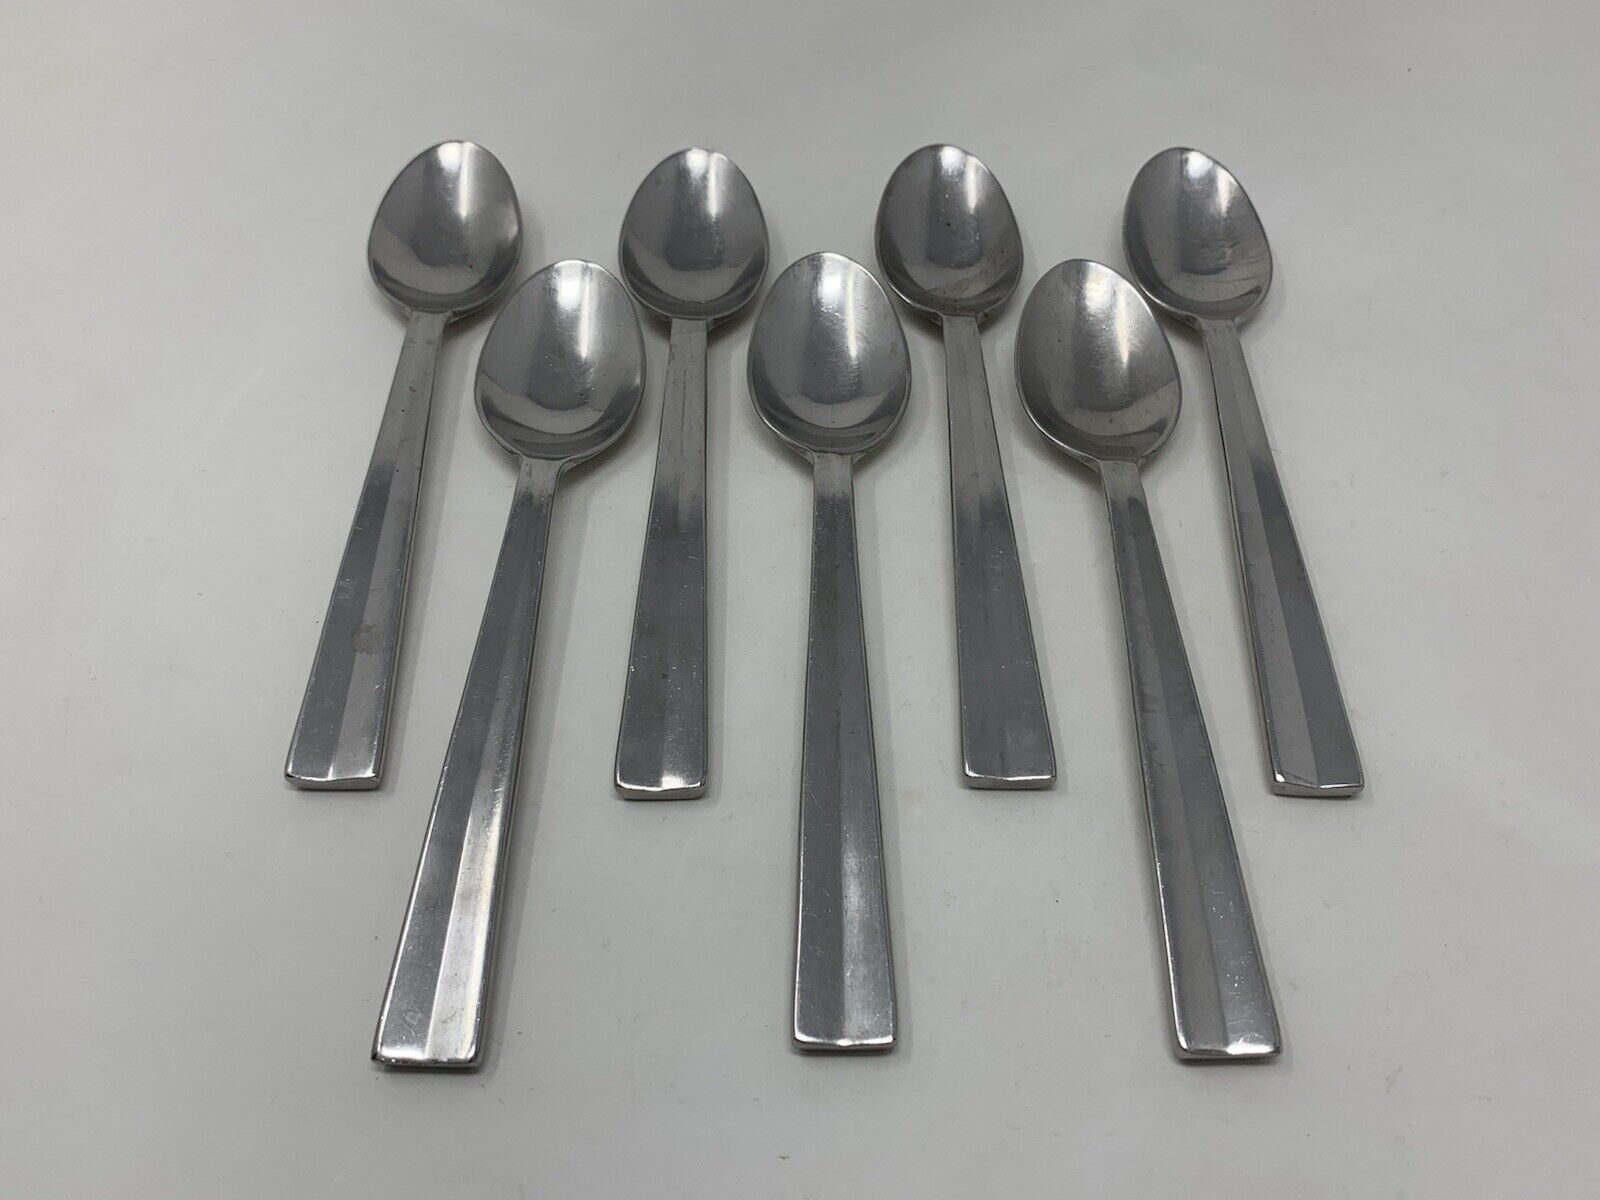 Calvin Klein Tate Stainless 7 Table Spoons Retired Impossible to Find